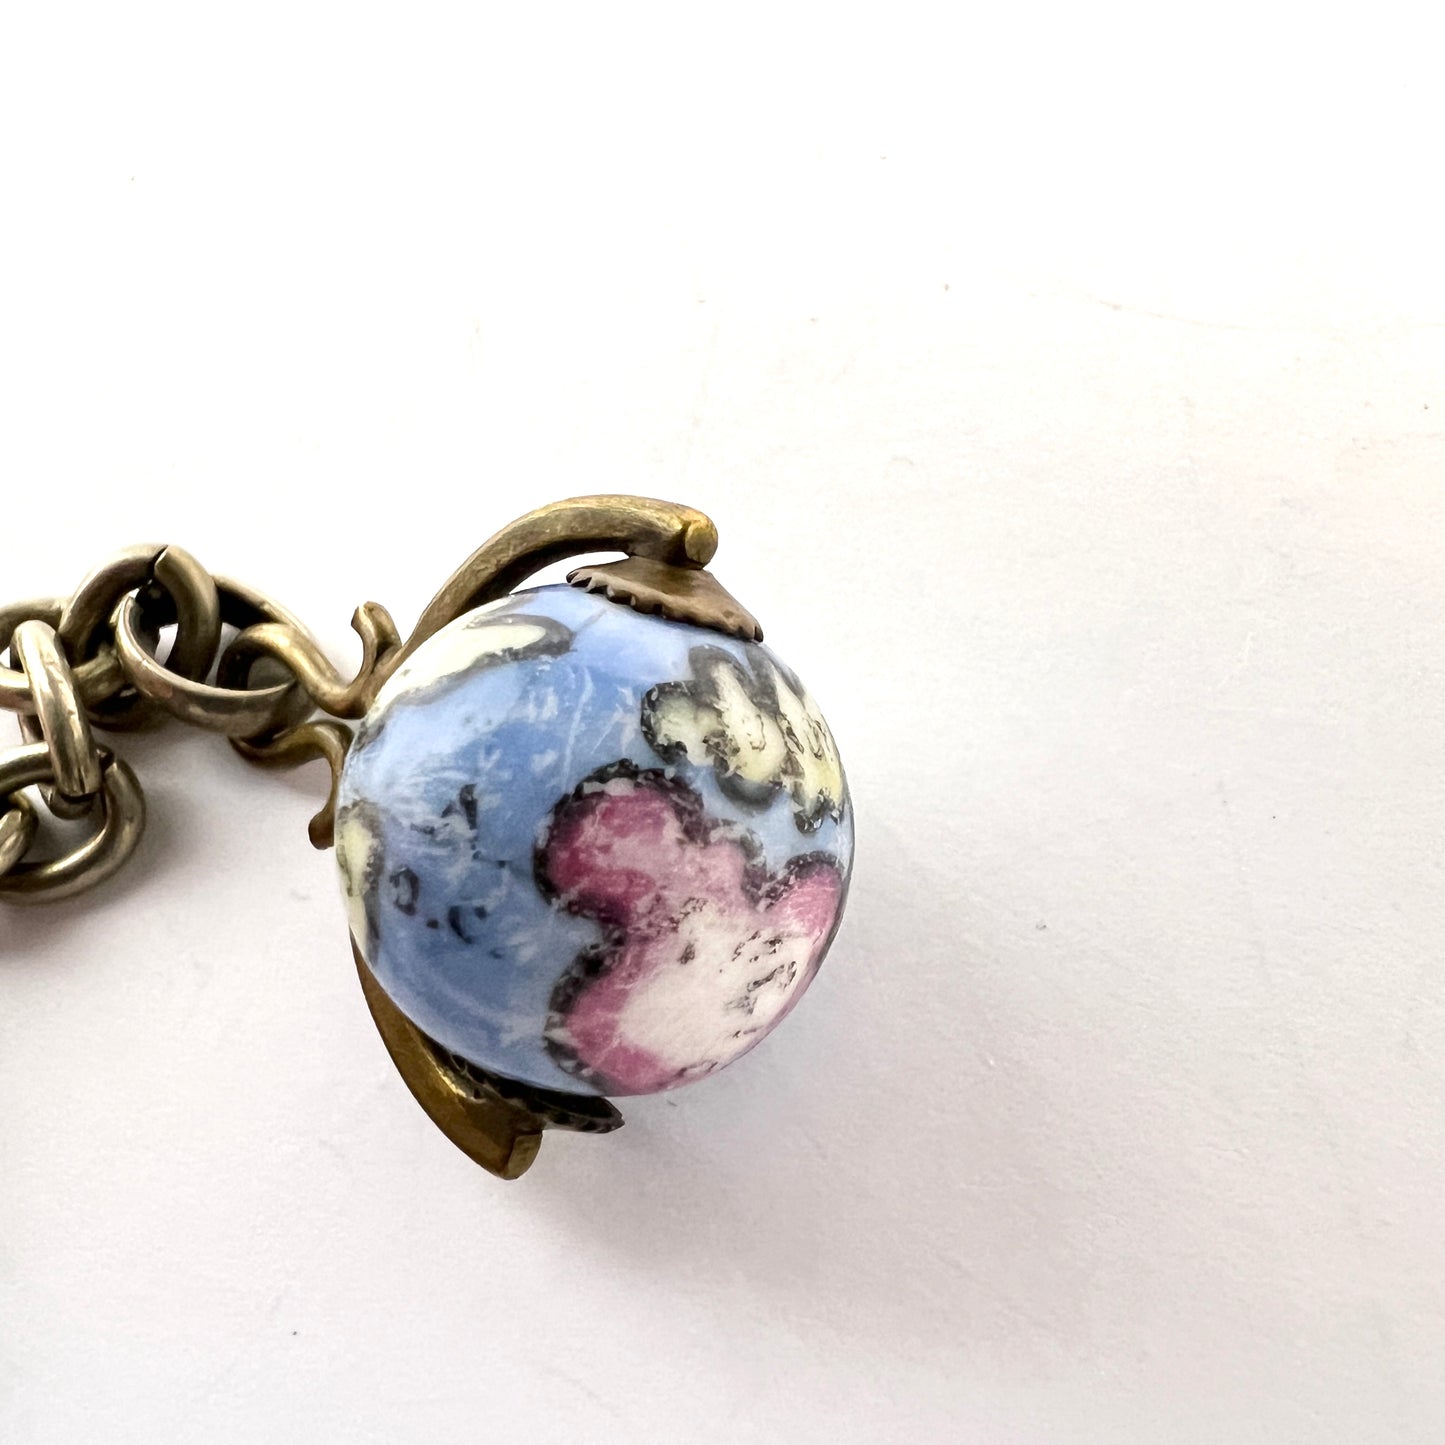 Antique Silver Plated Watch Chain With Enamel Globe Fob.